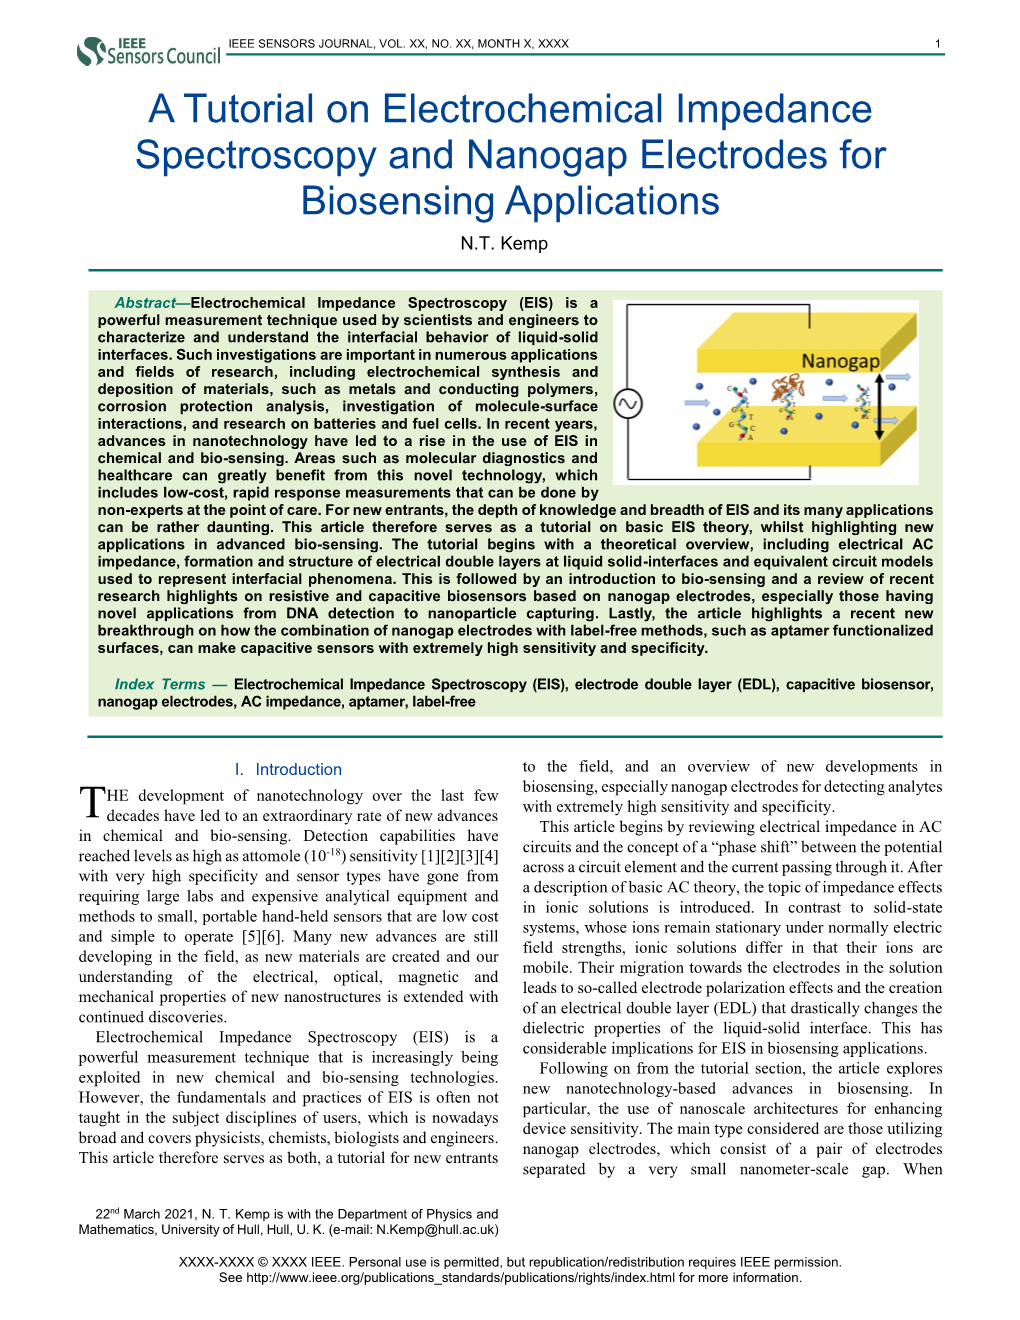 A Tutorial on Electrochemical Impedance Spectroscopy and Nanogap Electrodes for Biosensing Applications N.T